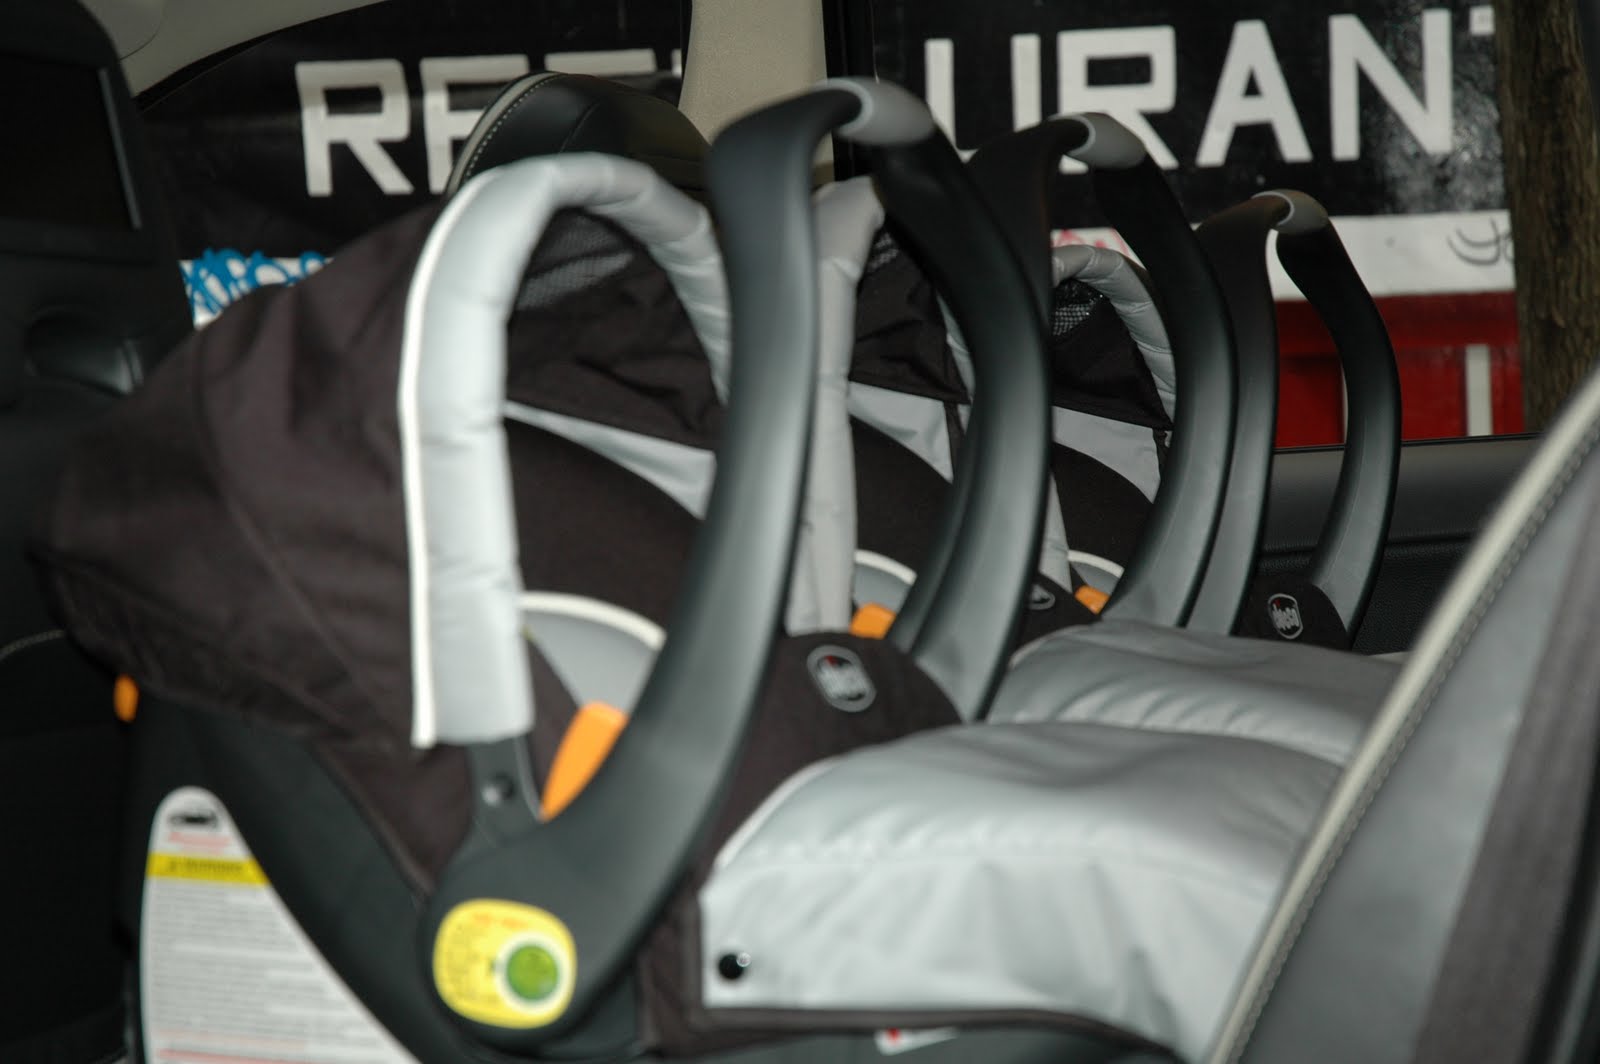 stroller for triplets with car seats